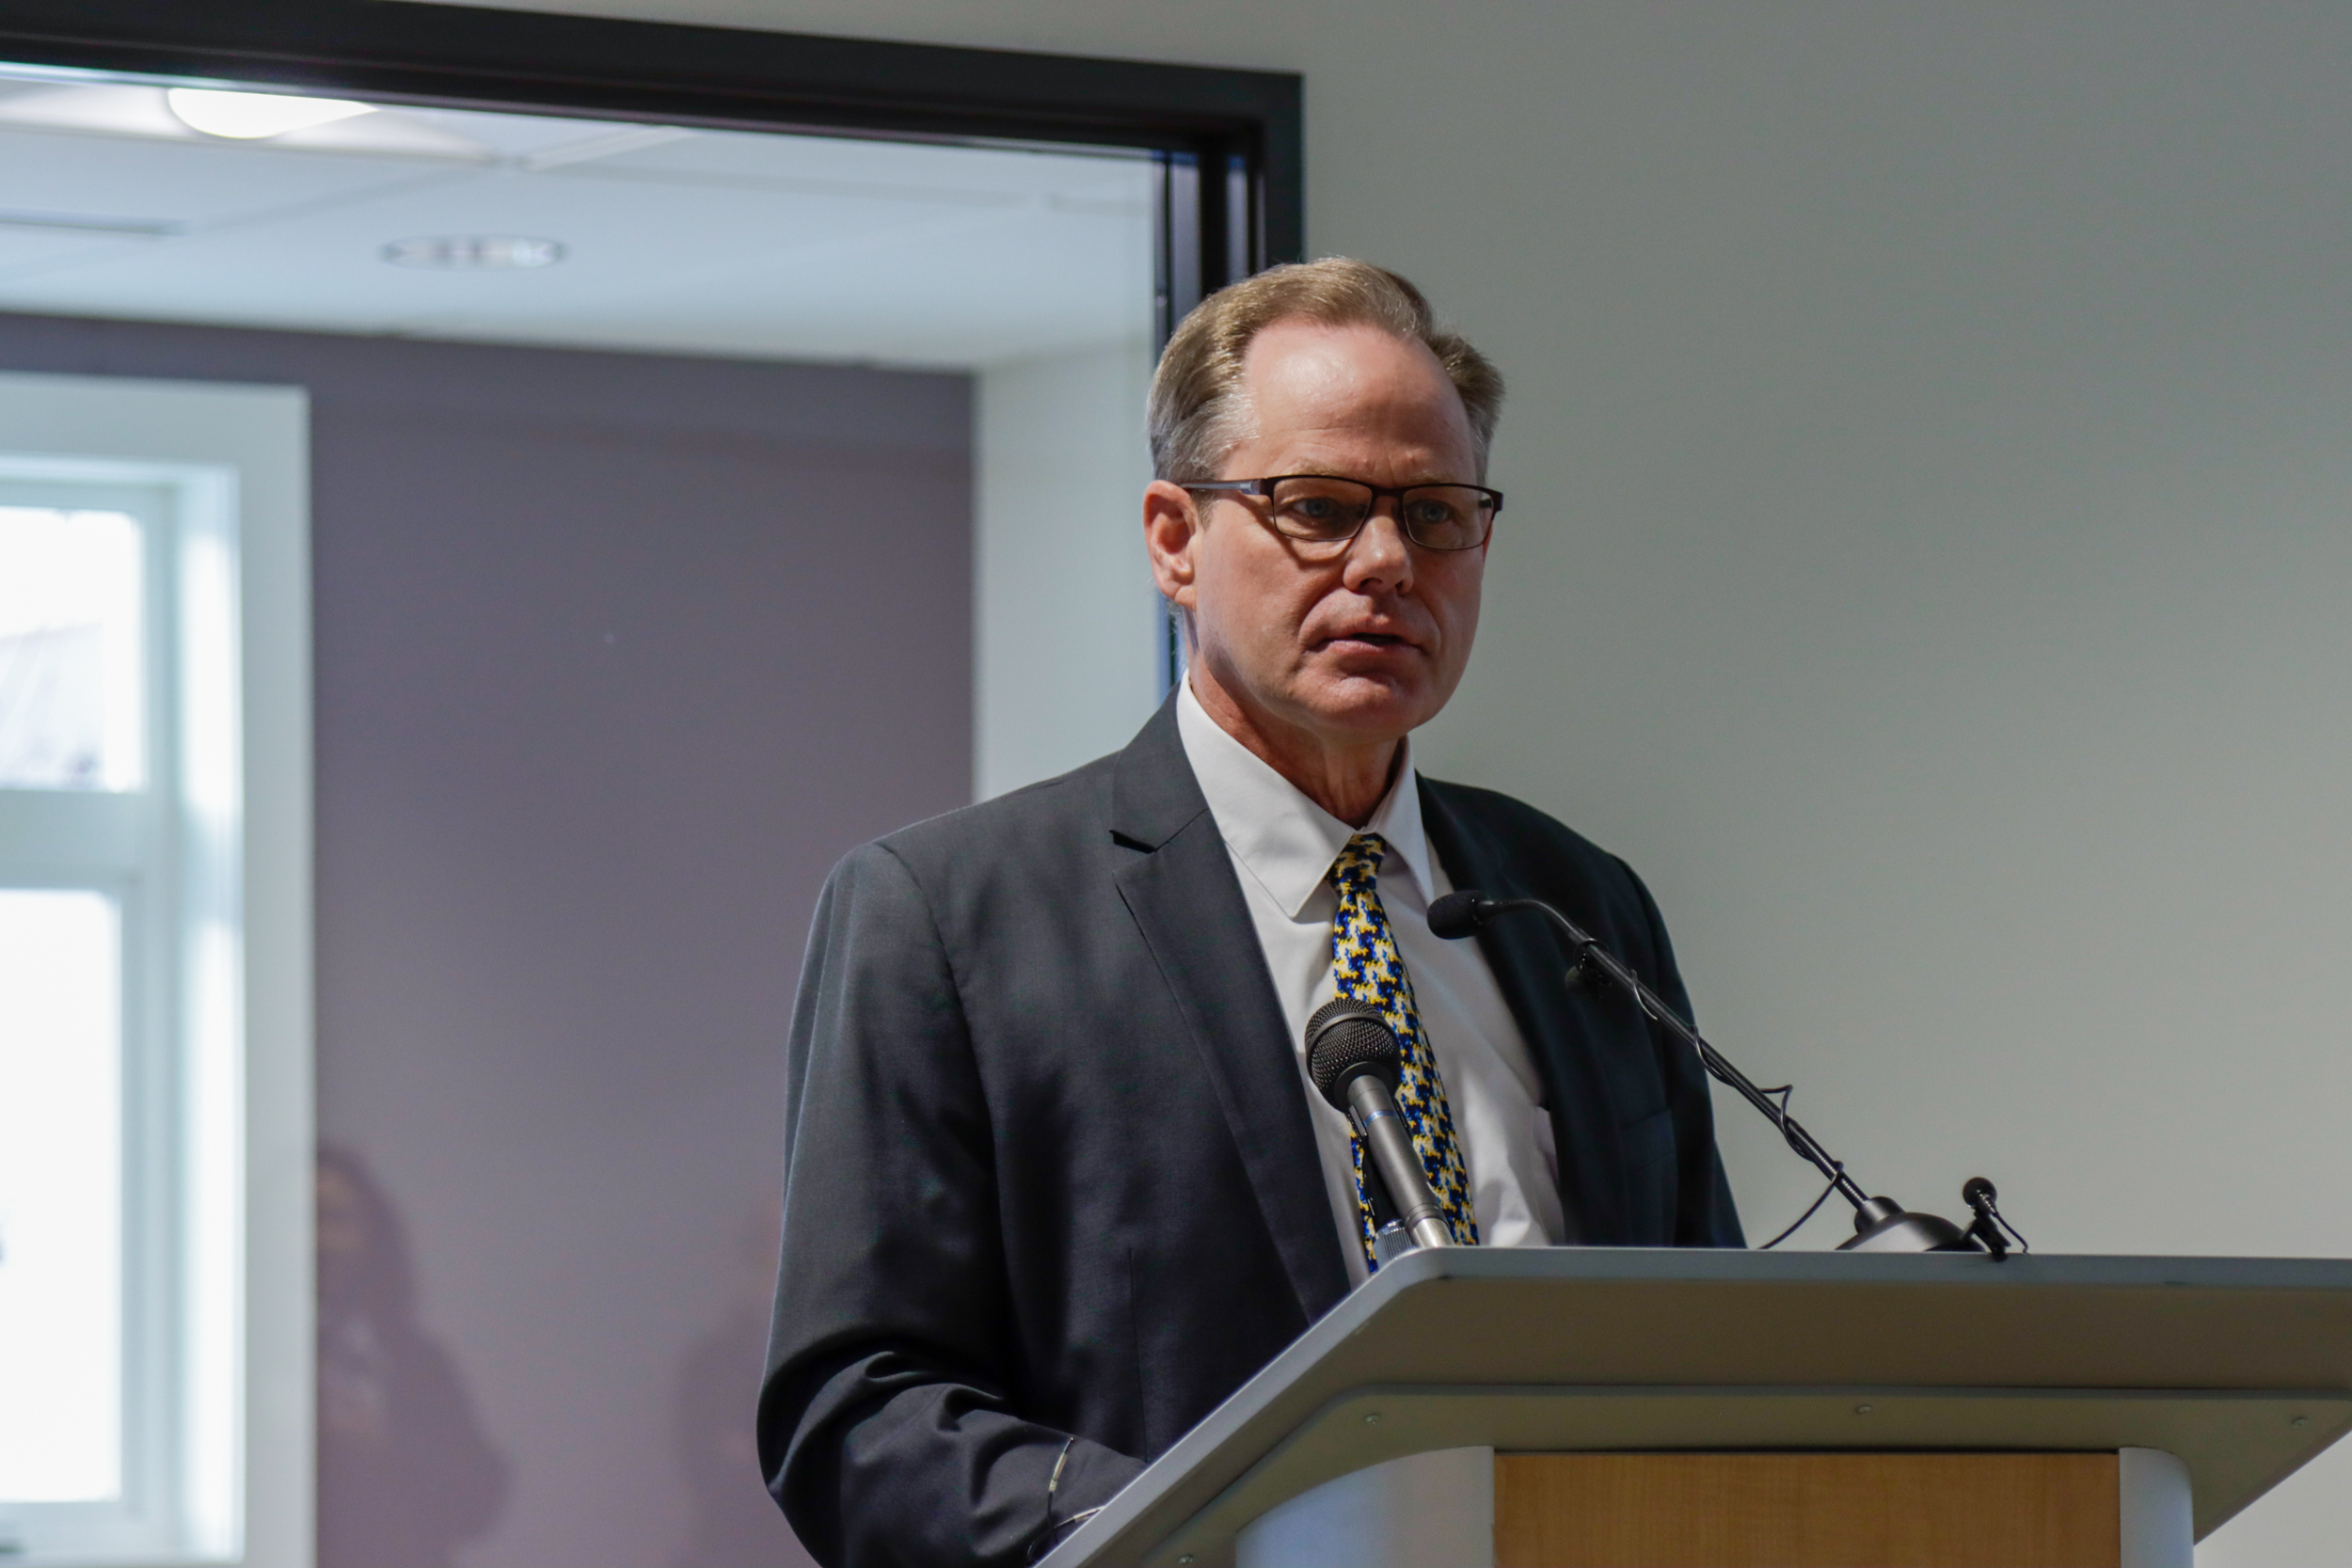 A man in a suit and glasses speaks from behind a podium.